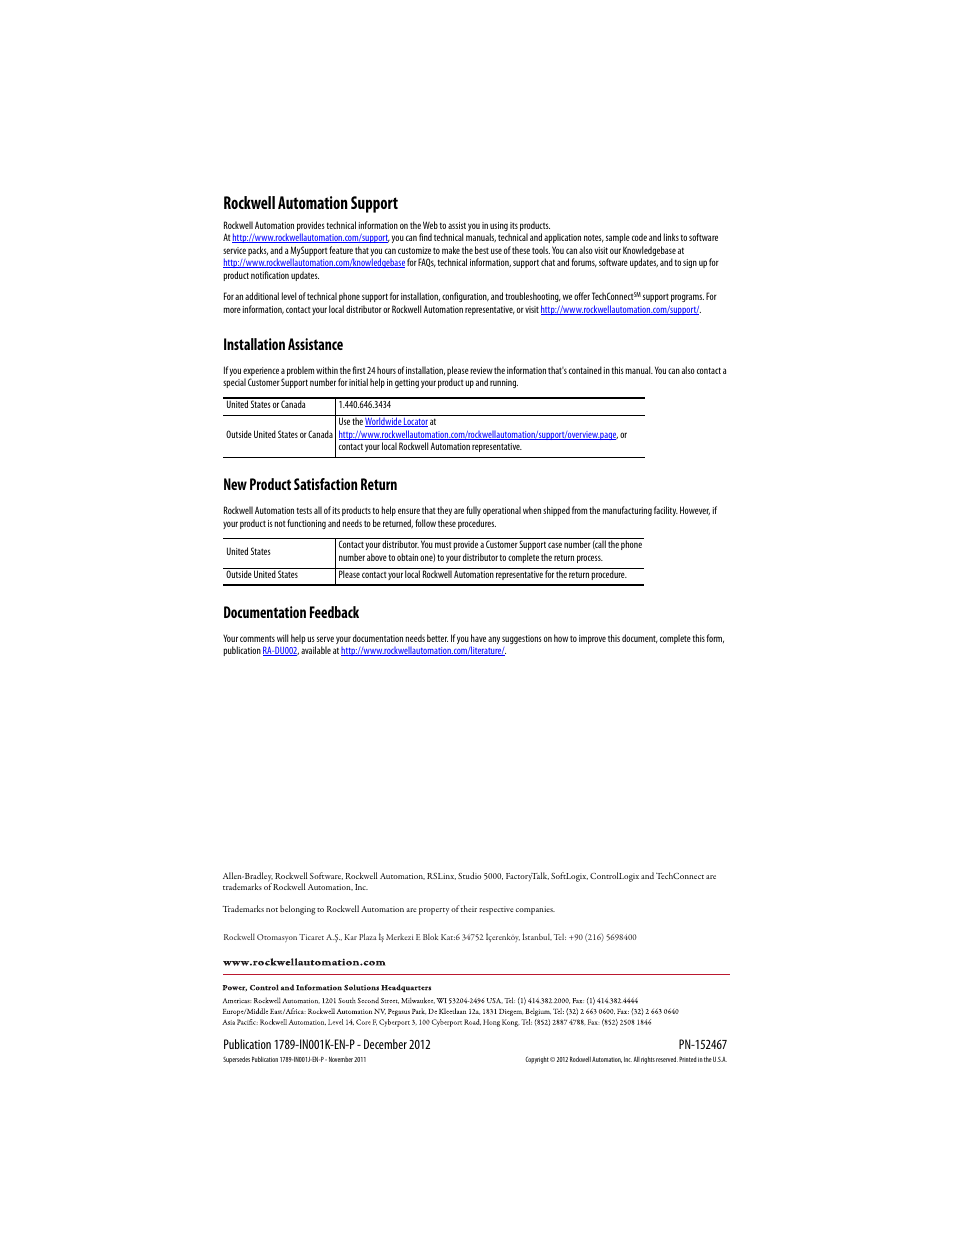 Back cover, Rockwell automation support, Installation assistance | New product satisfaction return, Documentation feedback | Rockwell Automation 1789-L10_L30_L60 SoftLogix 5800 Controller Installation Instructions User Manual | Page 14 / 14